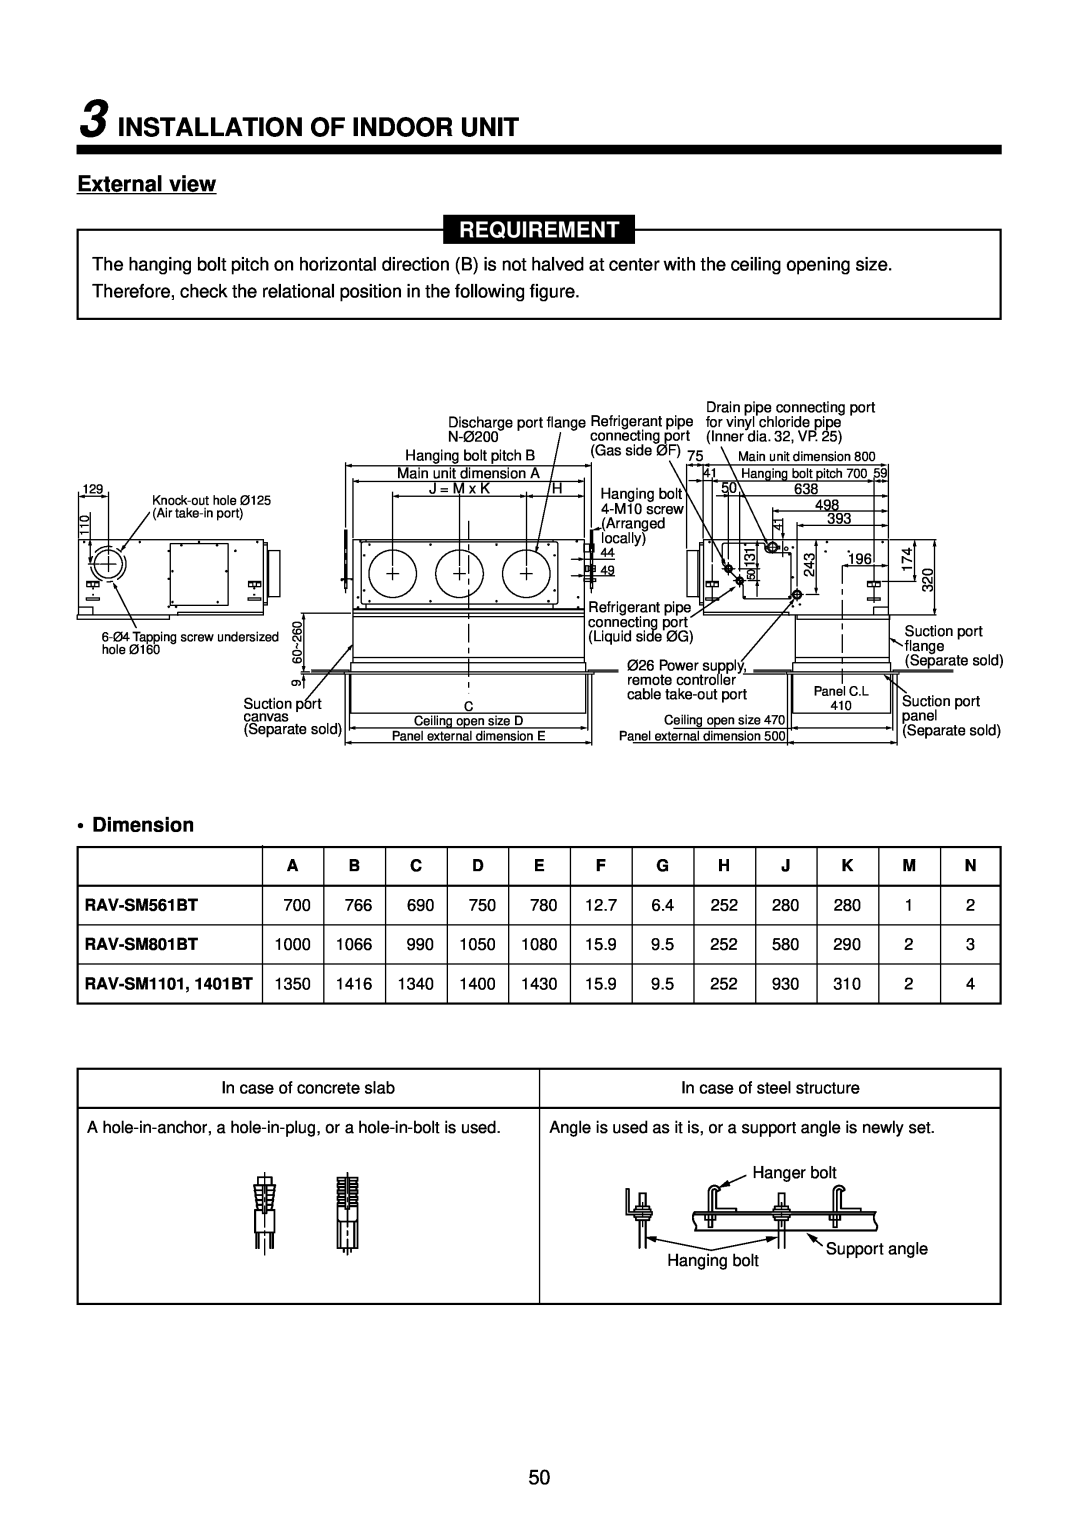 Toshiba R410A service manual Installation Of Indoor Unit, External view, Requirement, • Dimension 